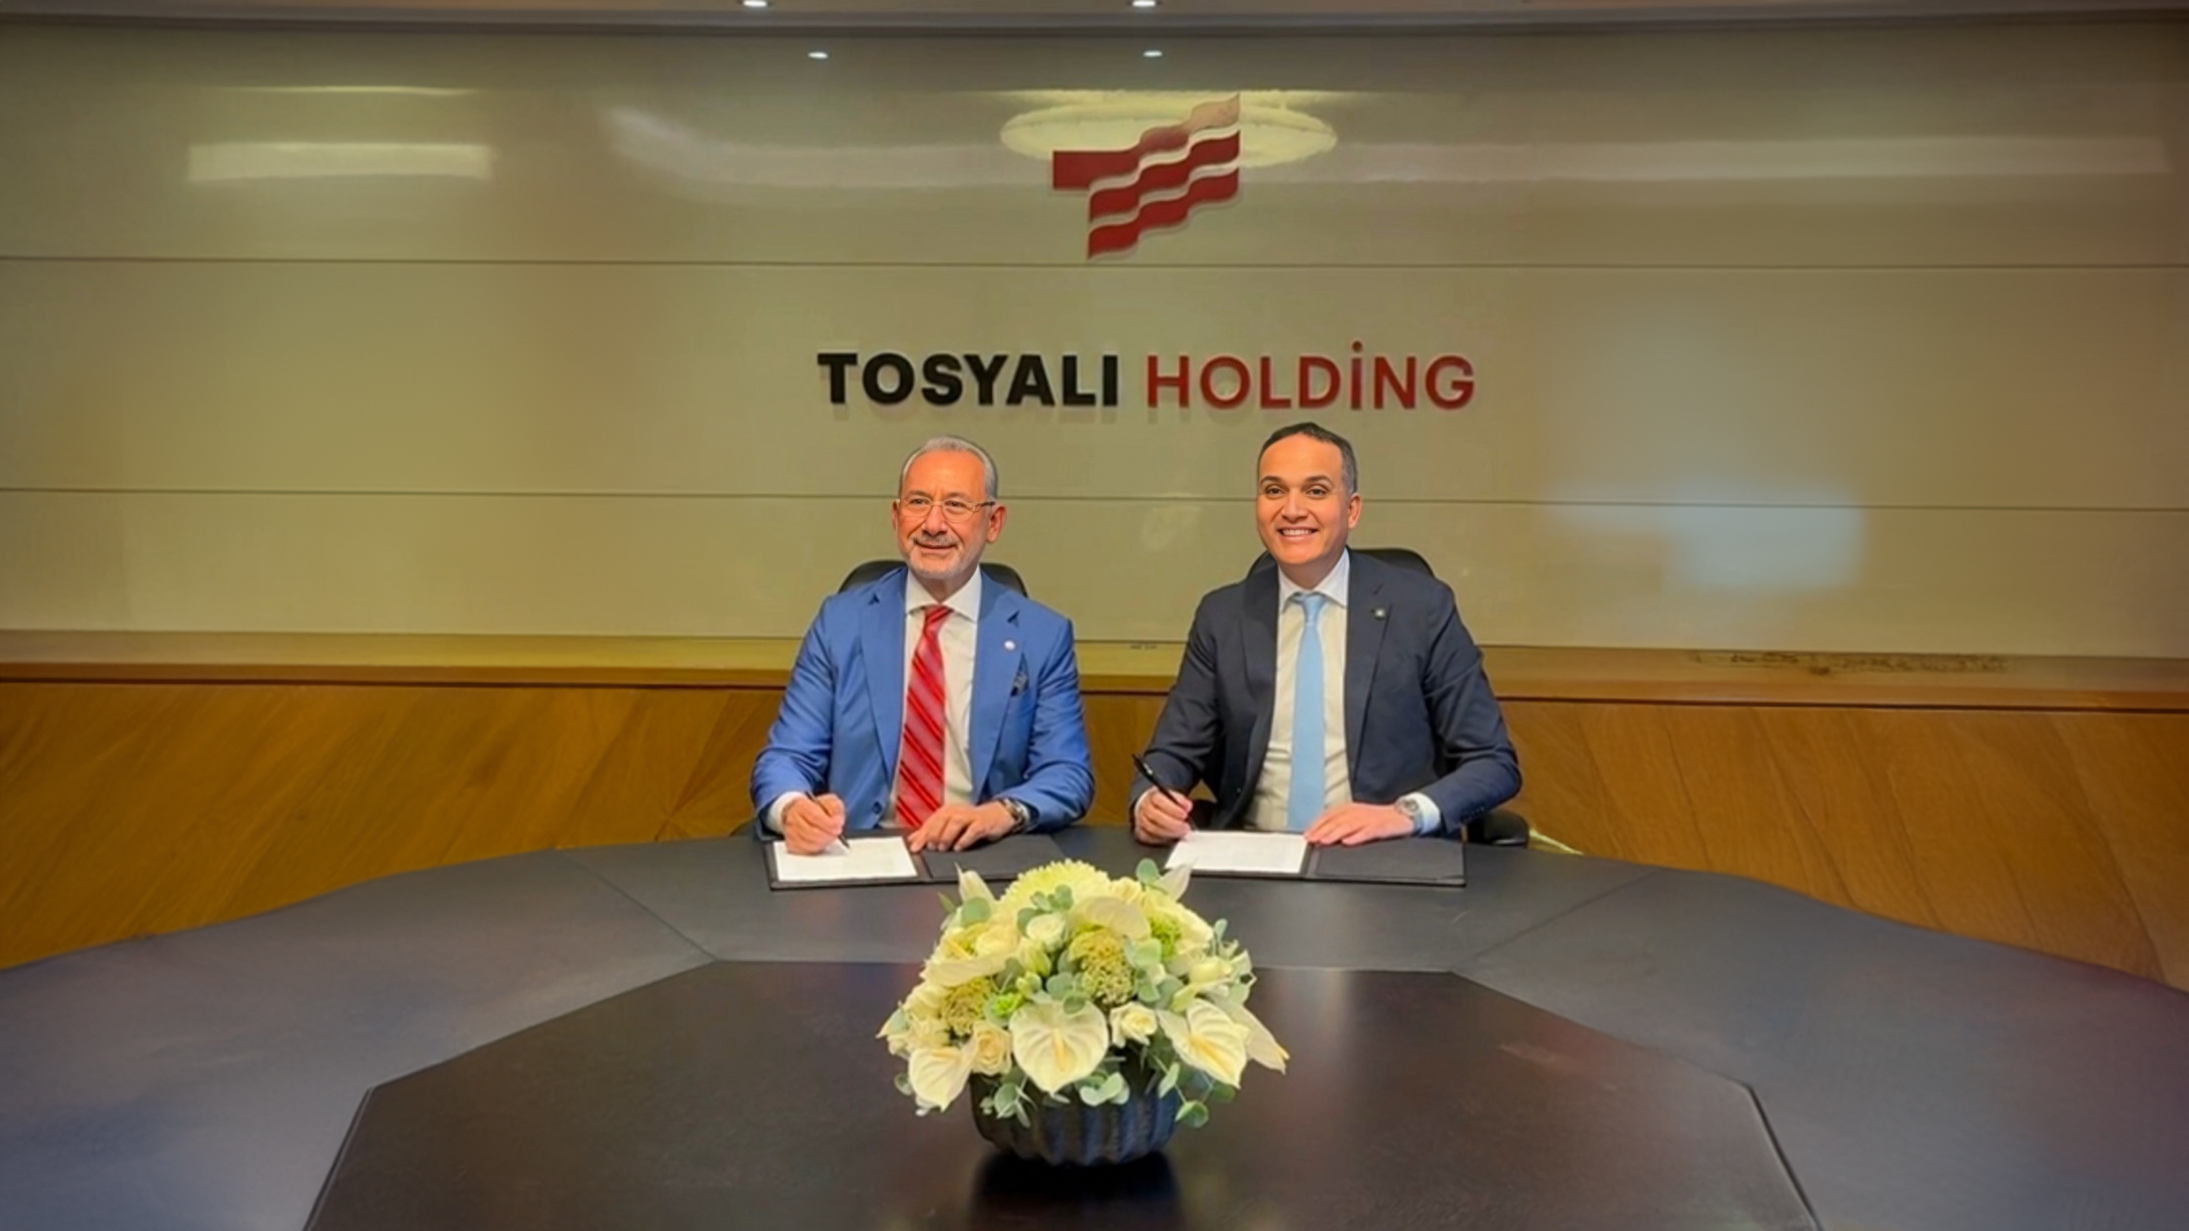 TOSYALI SULB STARTED THE INVESTMENT OF THE WORLD'S LARGEST DRI COMPLEX IN BENGHAZI / LIBYA